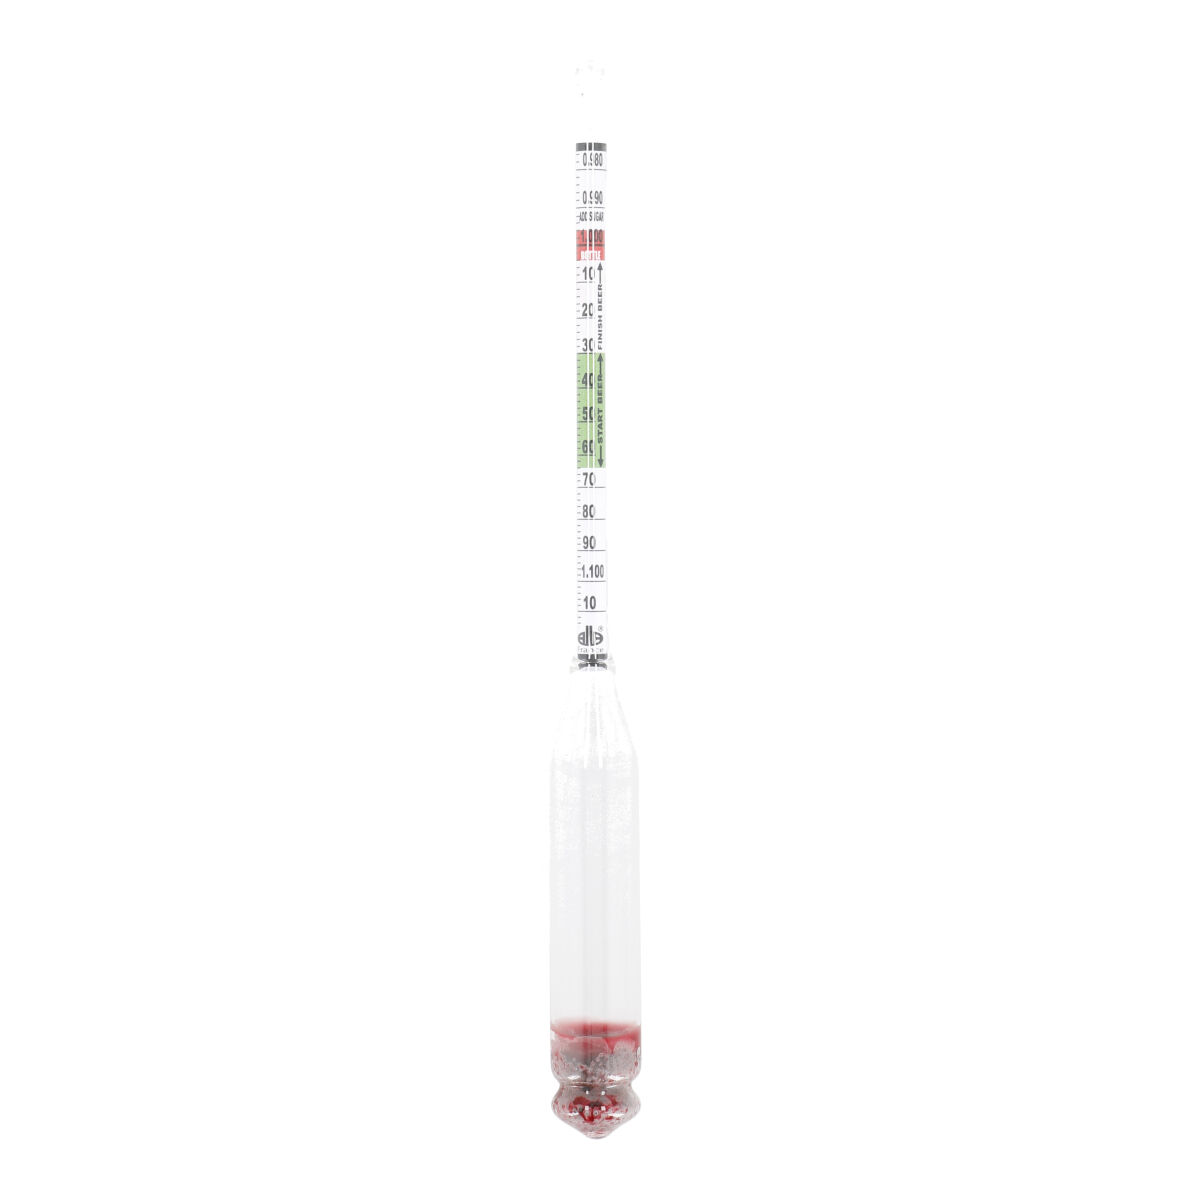 Hydrometer with color distribution